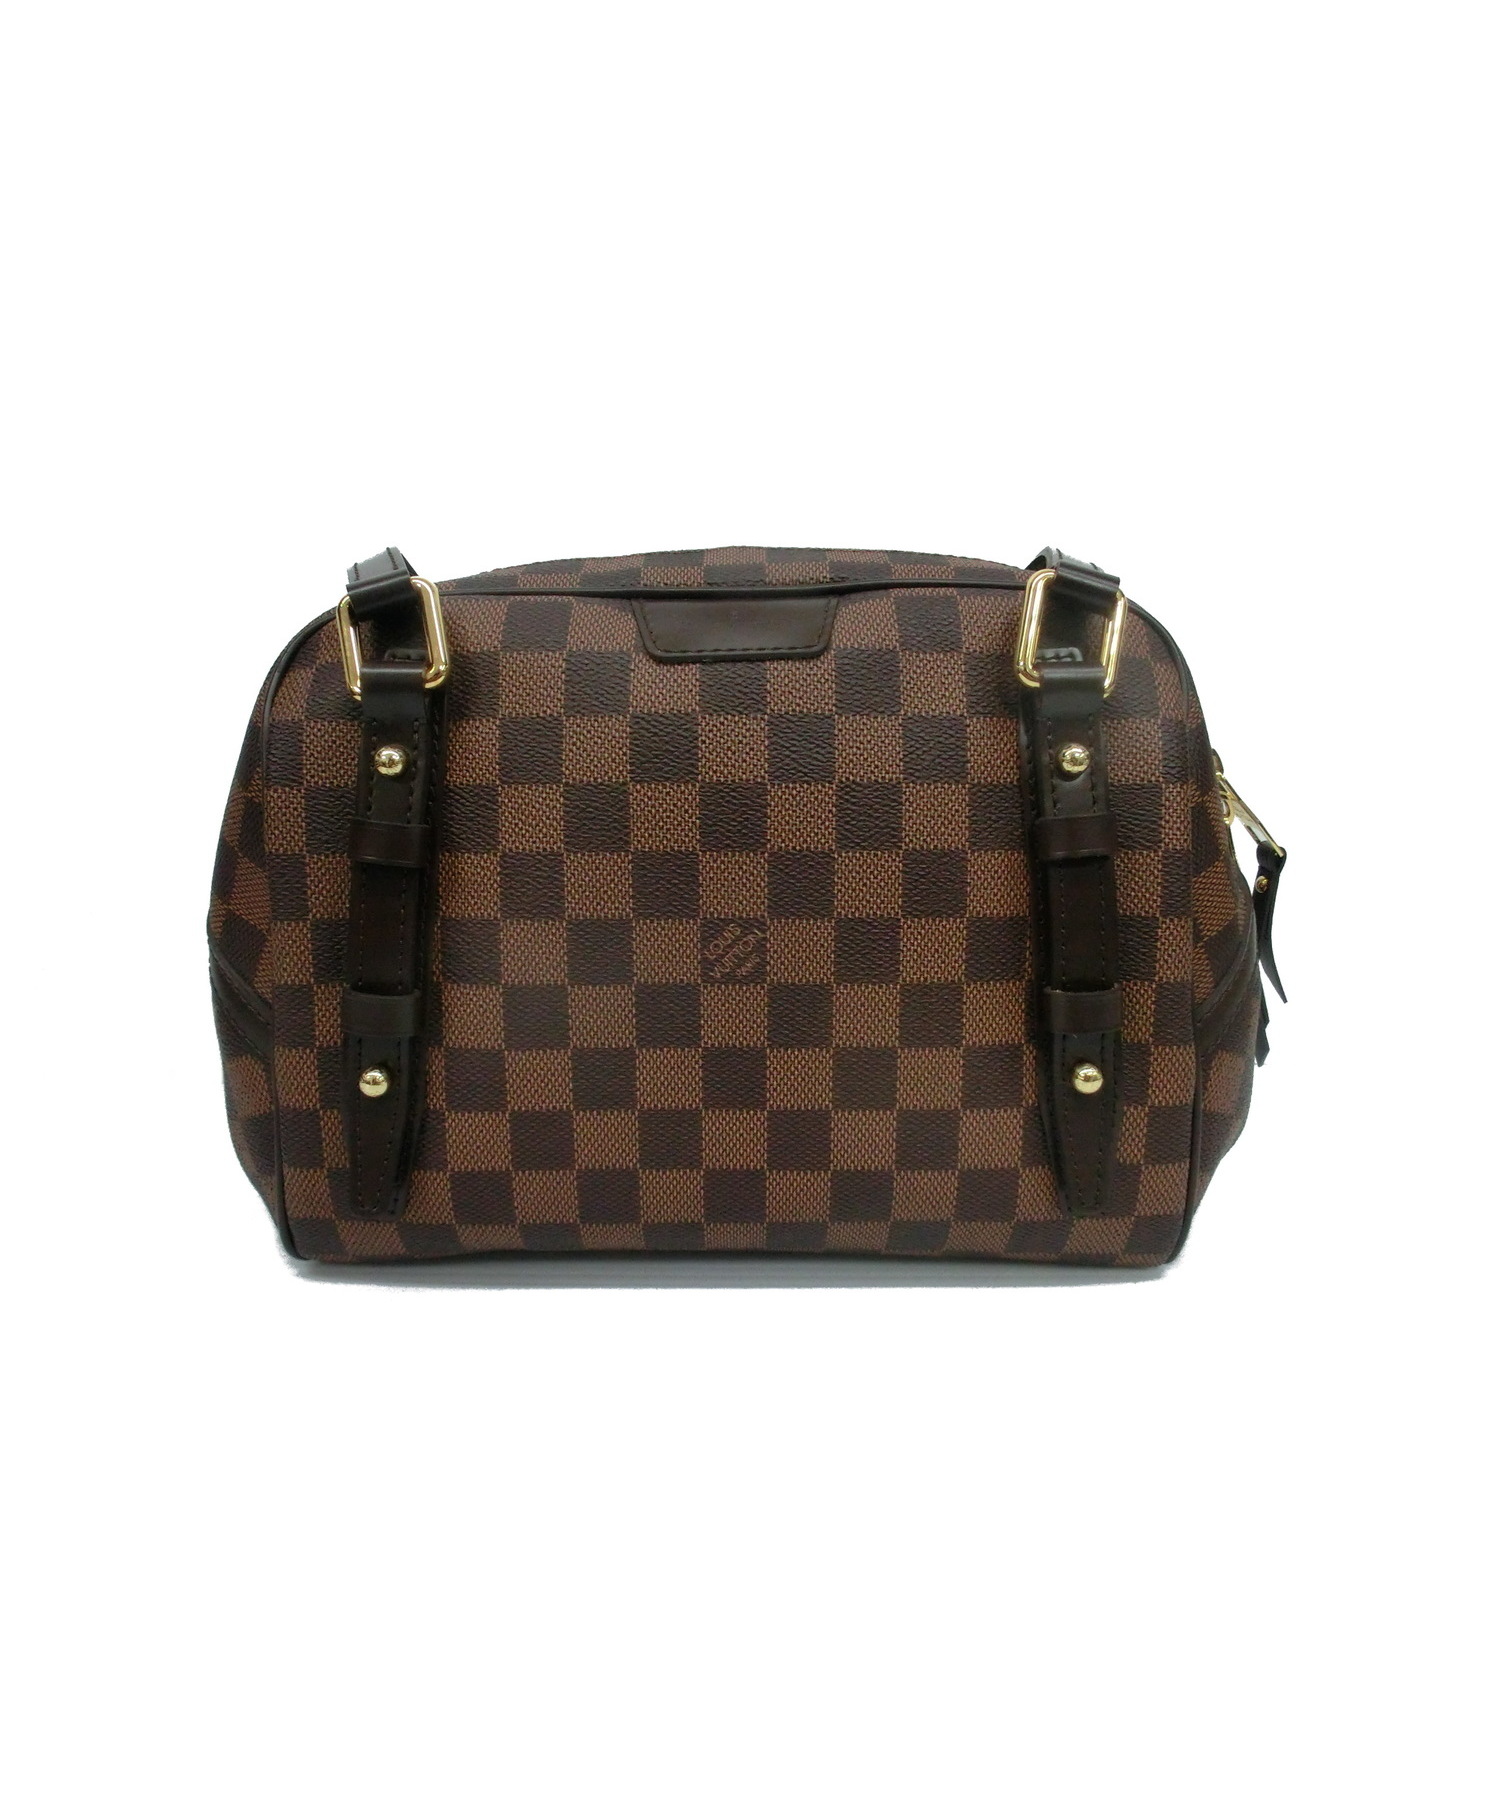 LOUIS VUITTON (ルイヴィトン) リヴィトンPM サイズ:PM ダミエ　リヴィトンPM N41157 FL4131